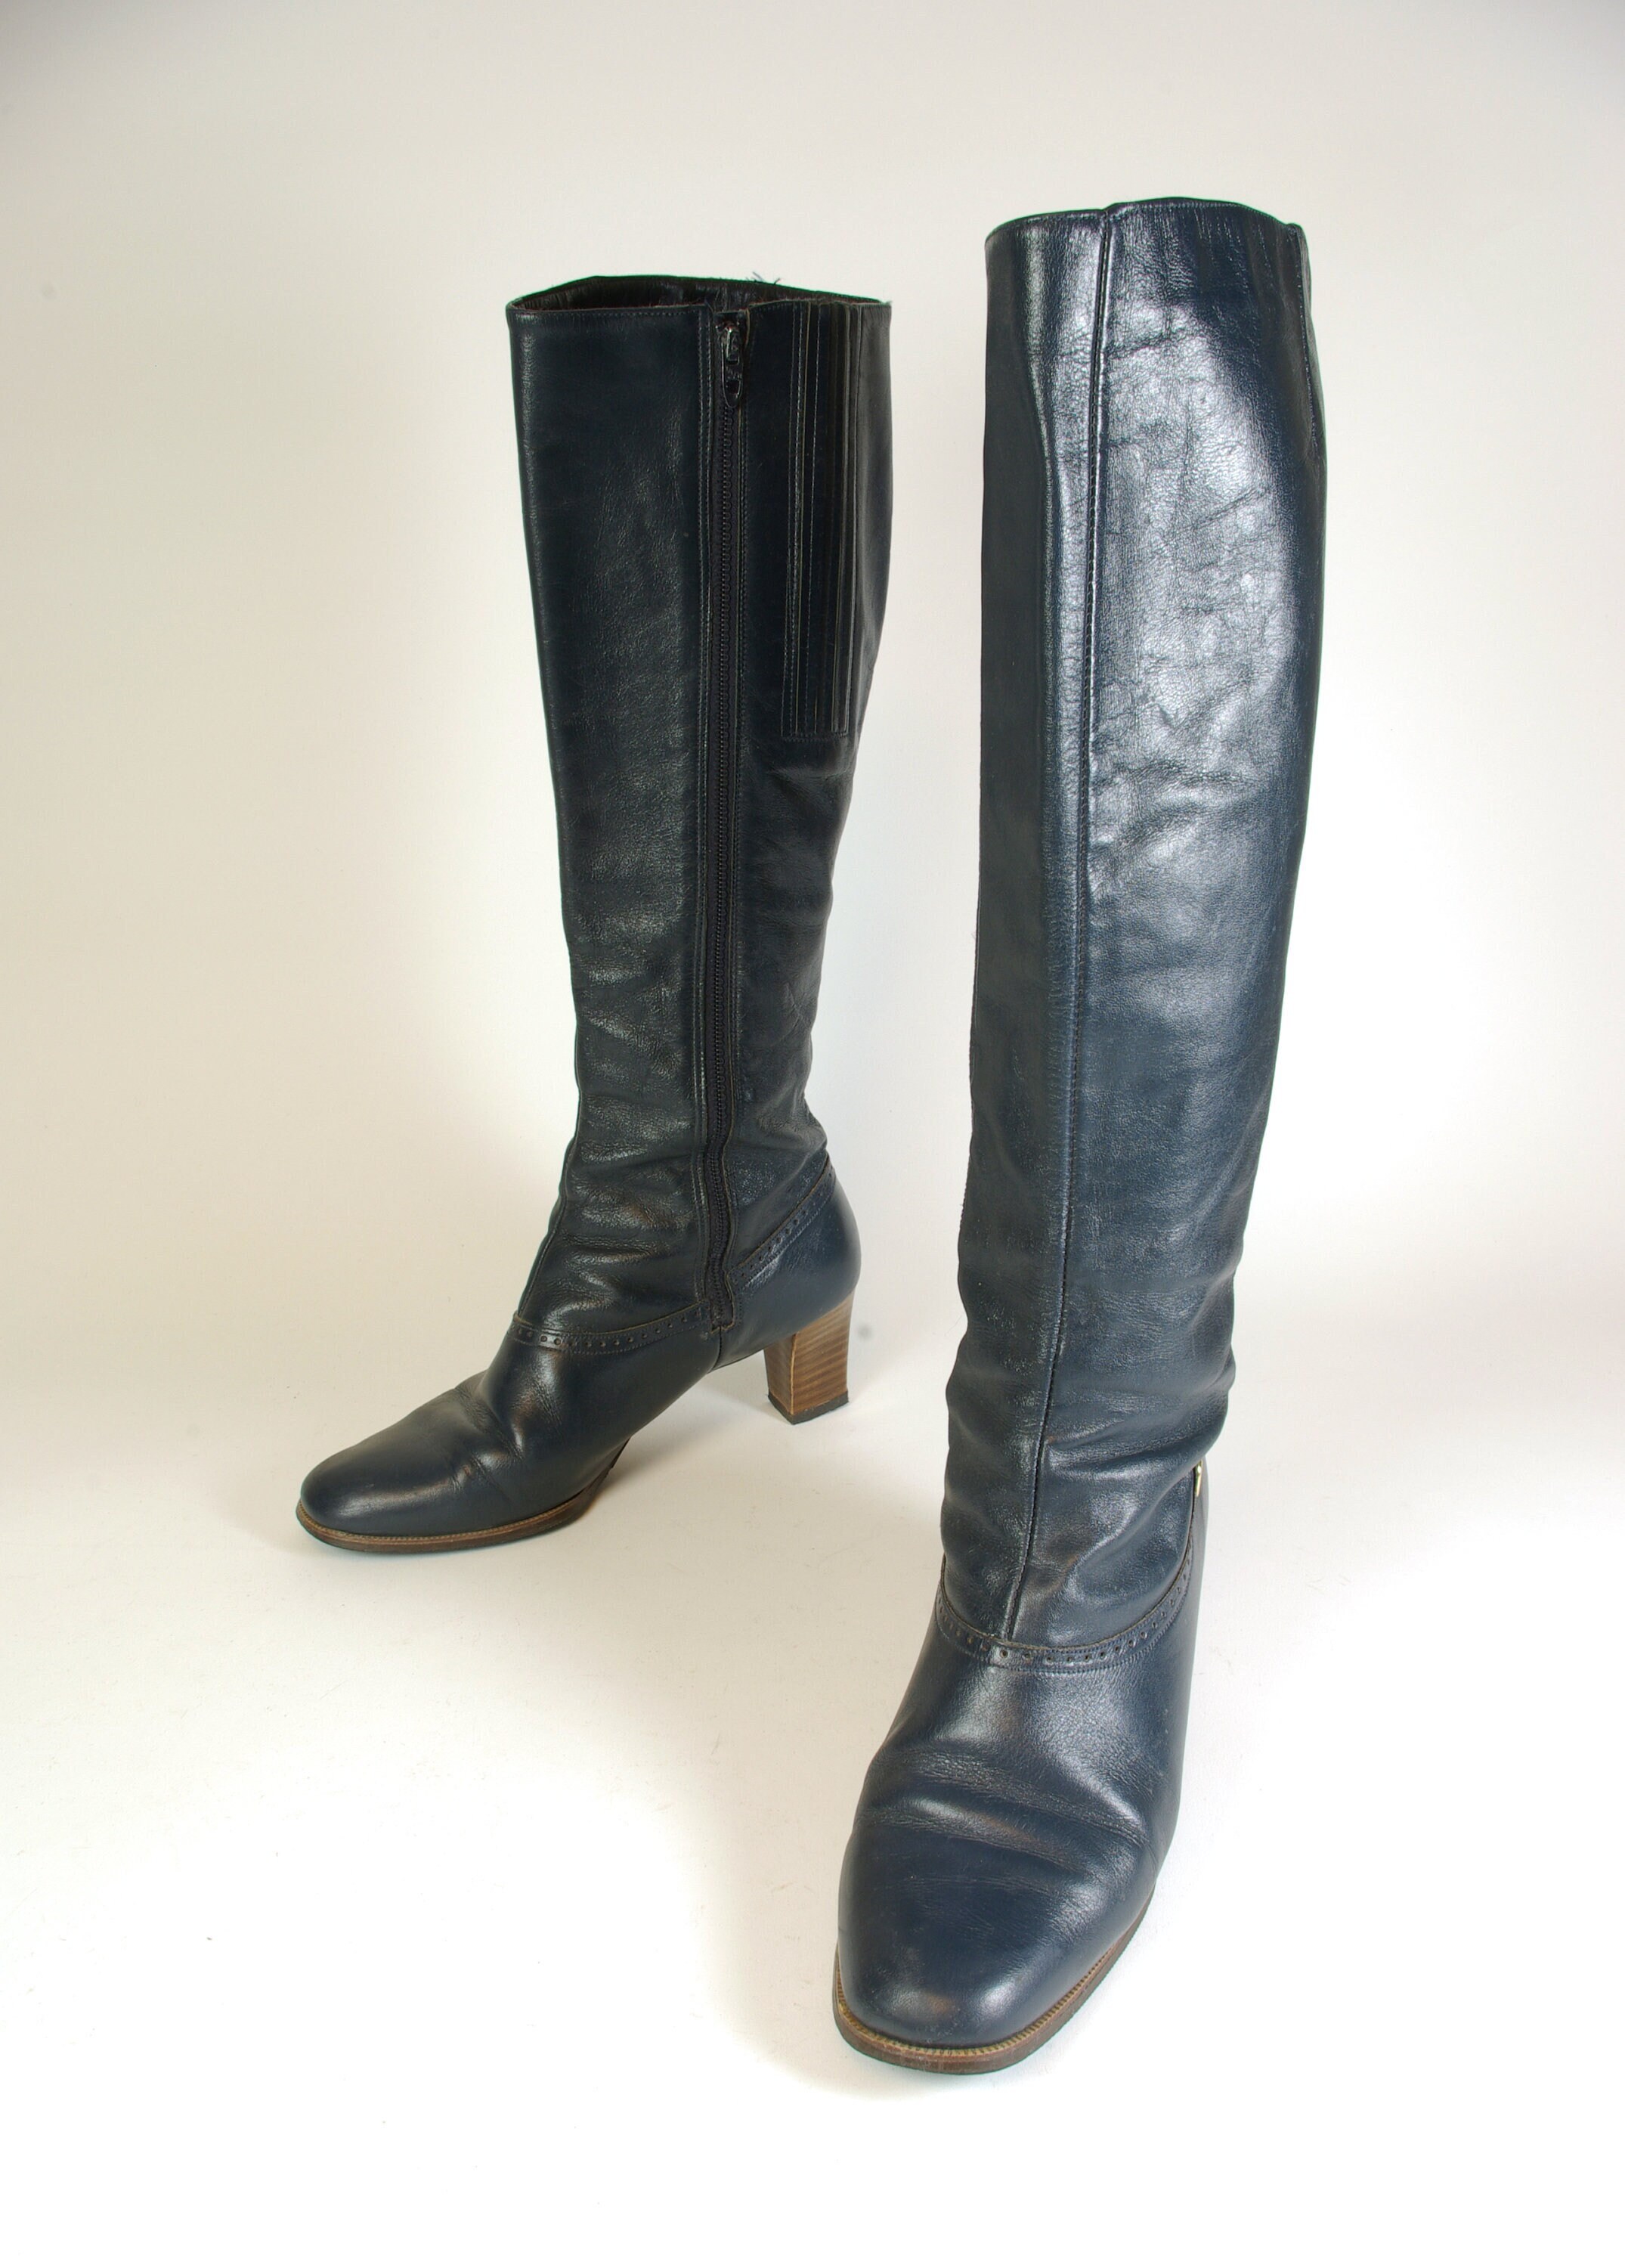 70s Black Leather Boots, Tall High Heel Boot Cobbie 9M